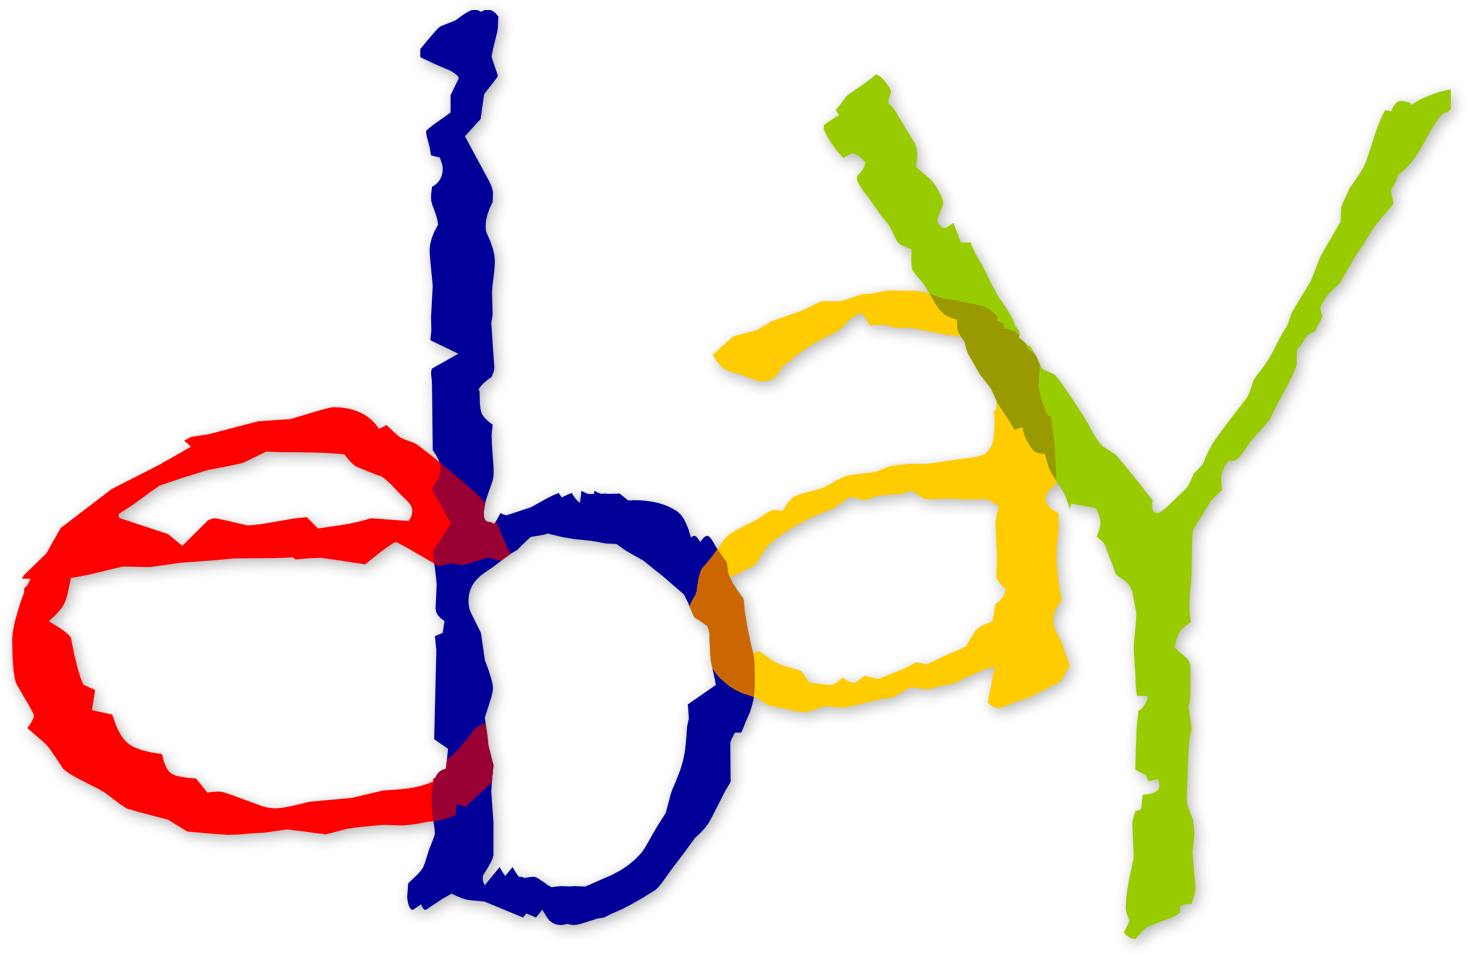 Gallery Of Ebay Logo Png Image With Ebay - Papyrus Font (1770x1093)